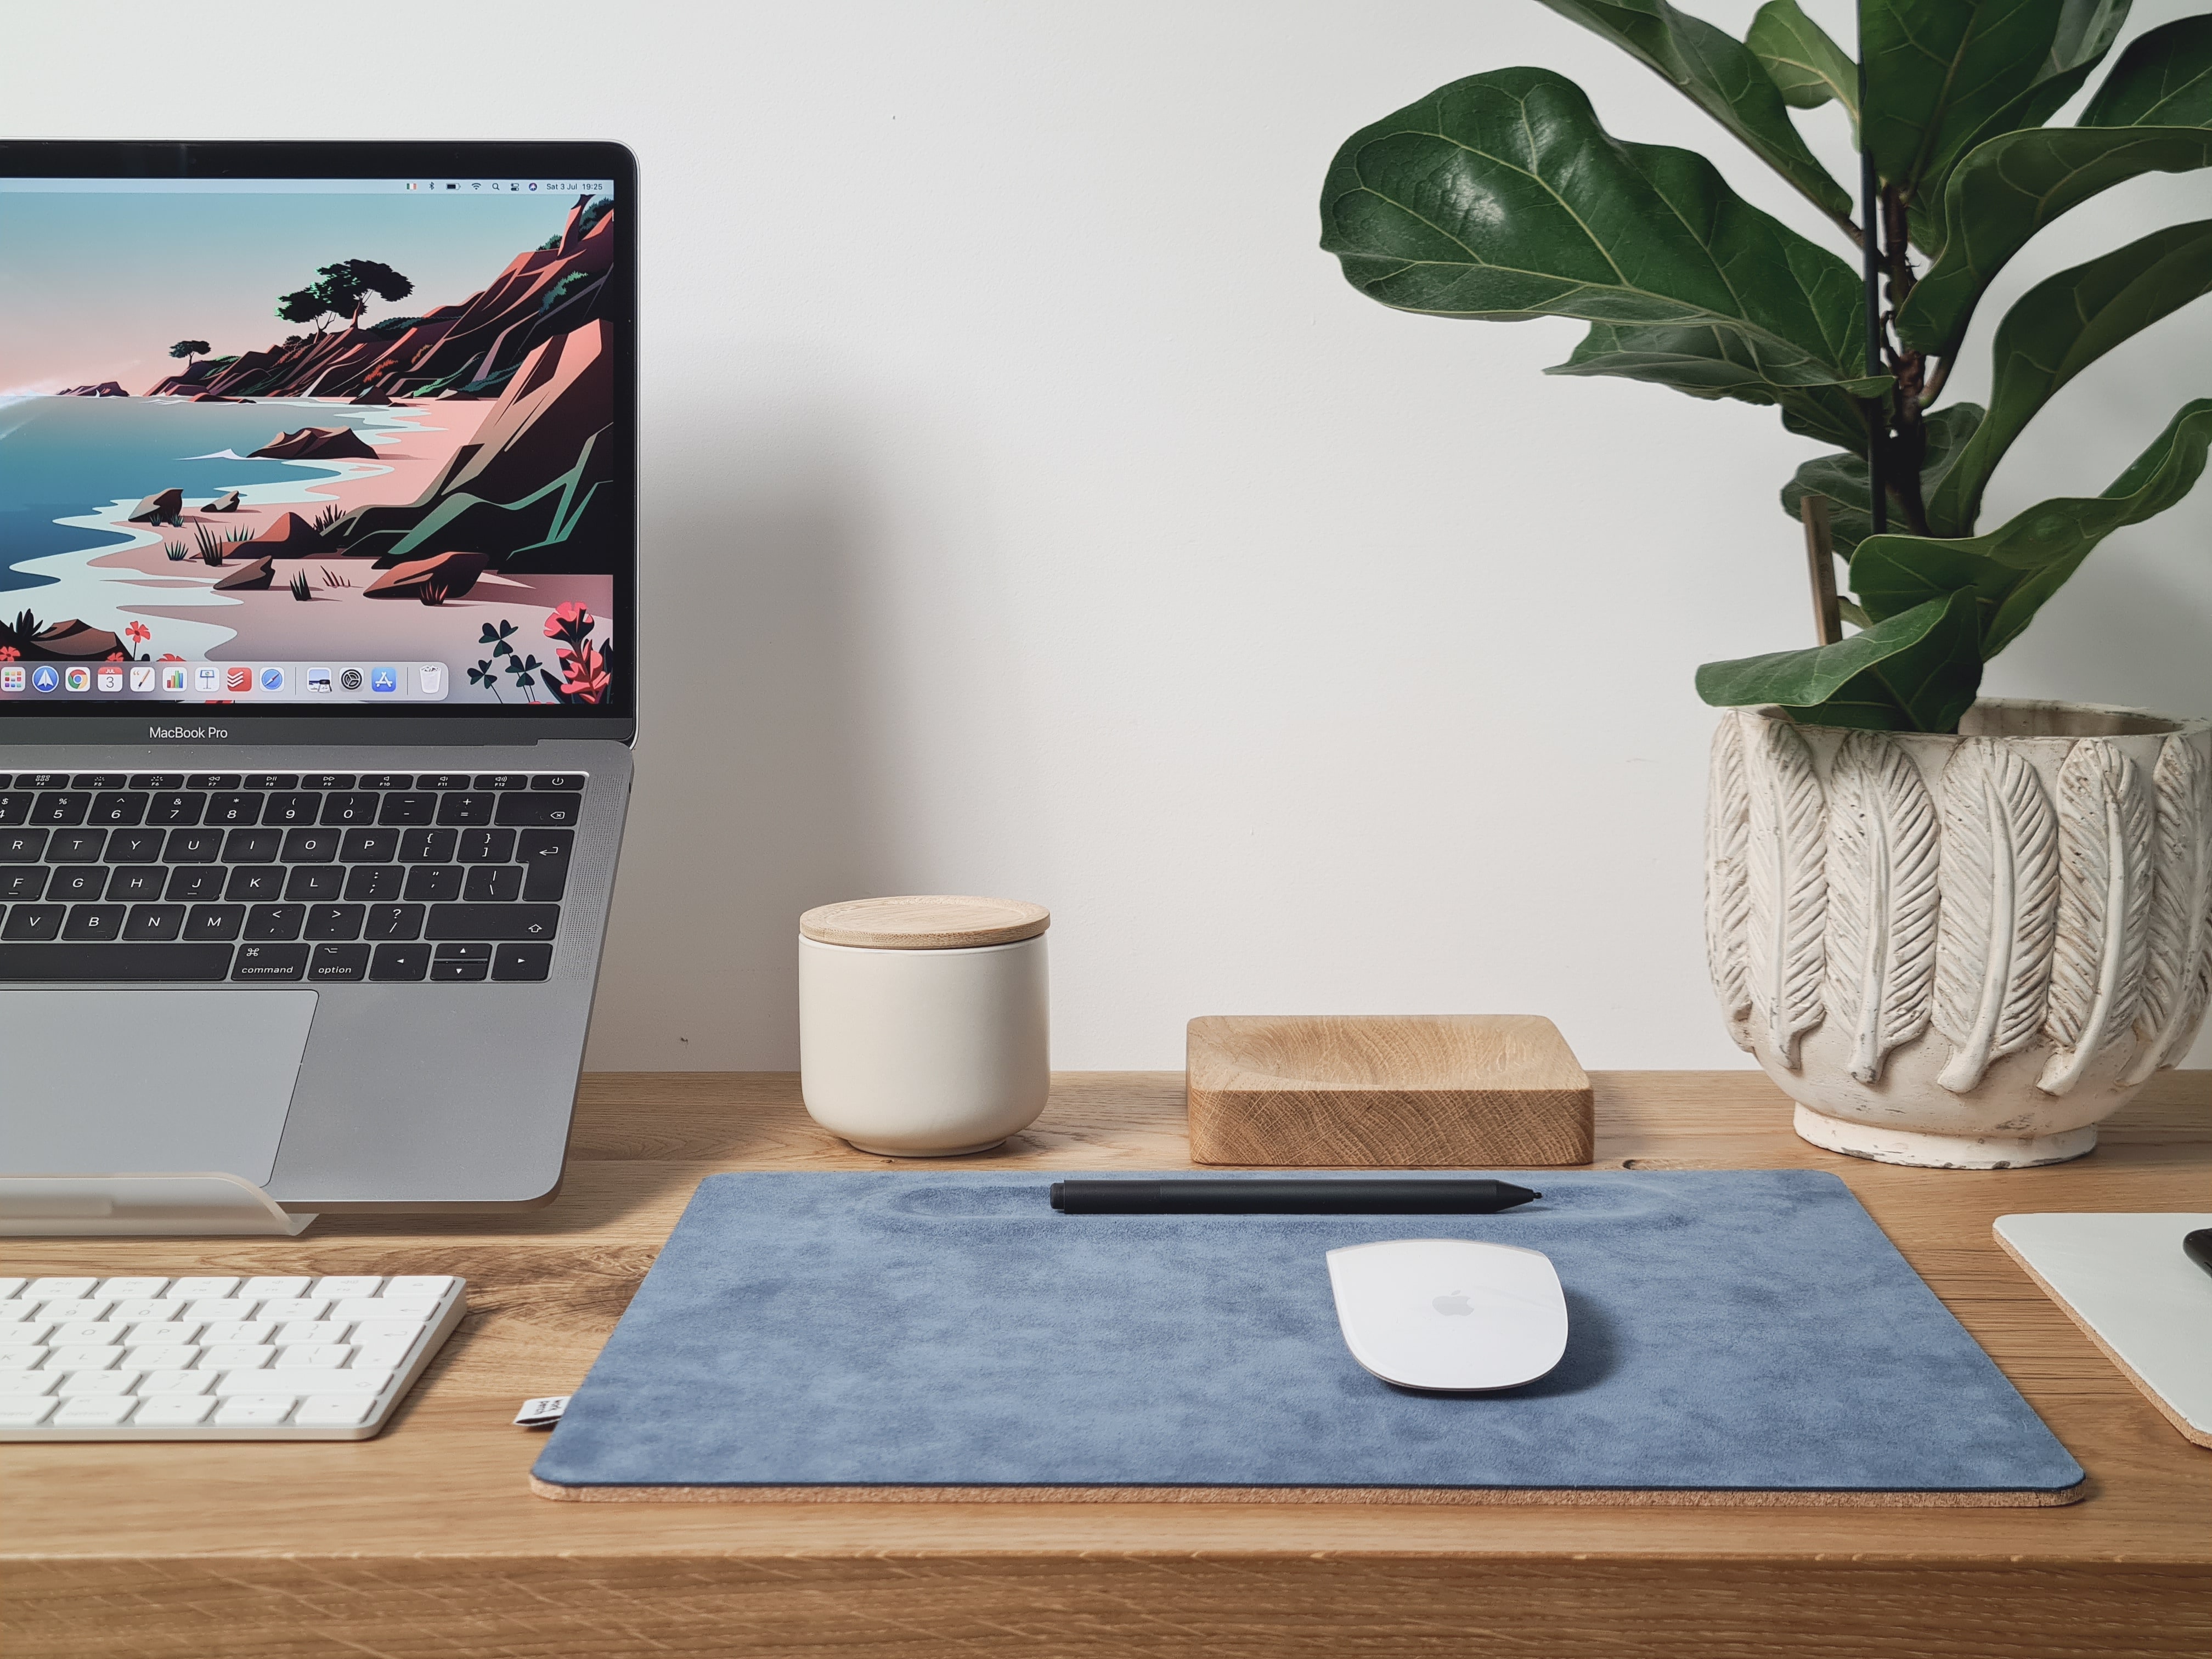 clean modern stylish desk with laptop, white mouse, and potted plant